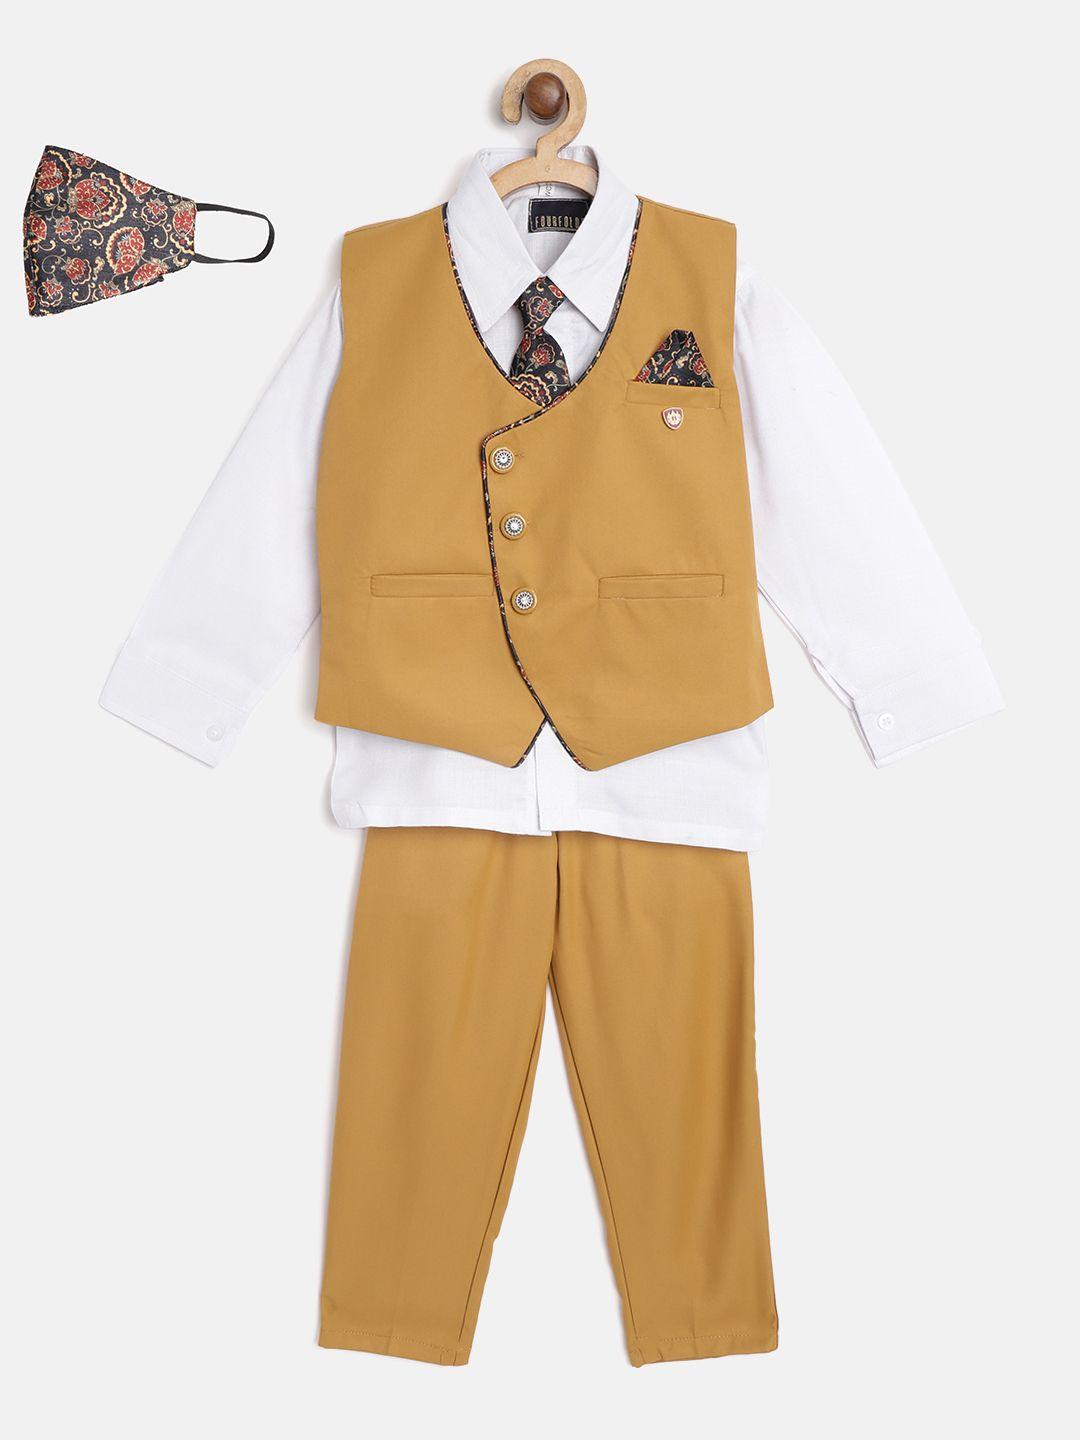 fourfolds-boys-white-&-mustard-yellow-solid-clothing-set-with-waistcoat,-tie-&-cloth-mask